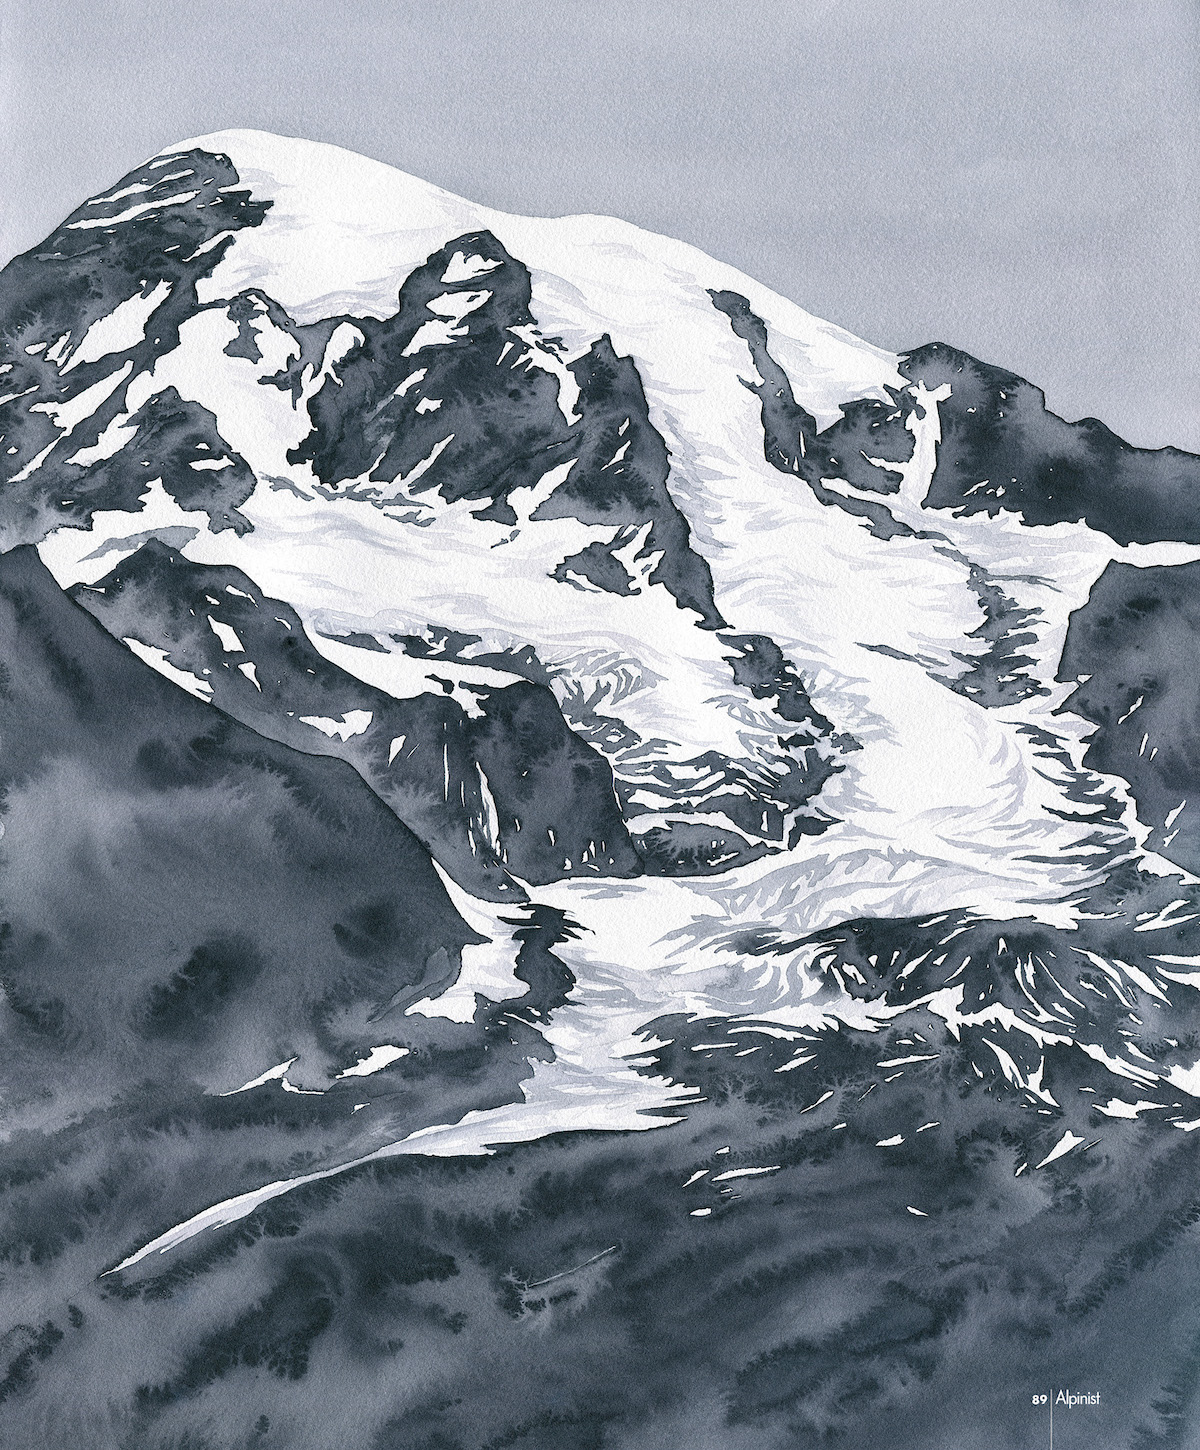 [2 of 2] Mt. Rainier, 1890 vs. 2018. The artist recounts: These paintings illustrate the recession of the Nisqually Glacier from 1890 to 2018. The 1890 painting is based on an image found in a photographic analysis by Fred Veatch. According to geomorphologist Paul Kennard, the Nisqually Glacier is losing up to a quarter mile of length each year. [Artwork] Claire Giordano